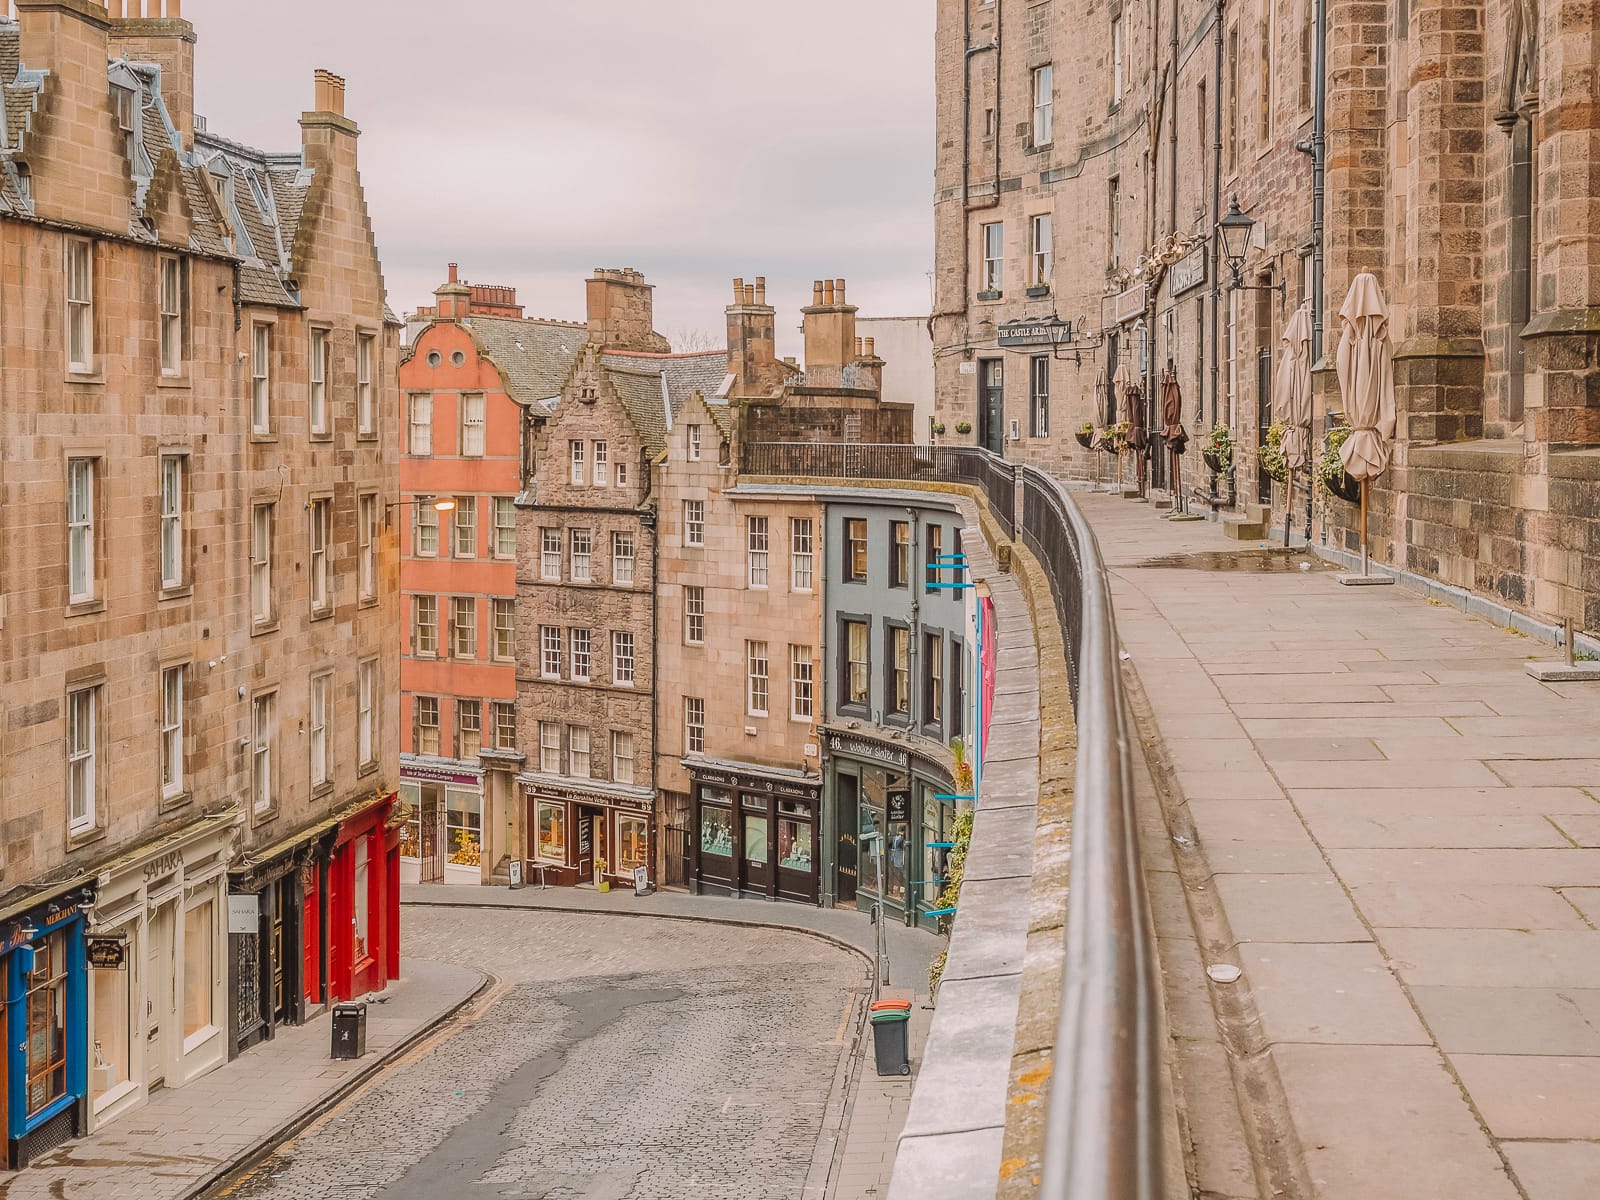 17 Of The Best Things To Do In Edinburgh, Scotland - Hand Luggage Only